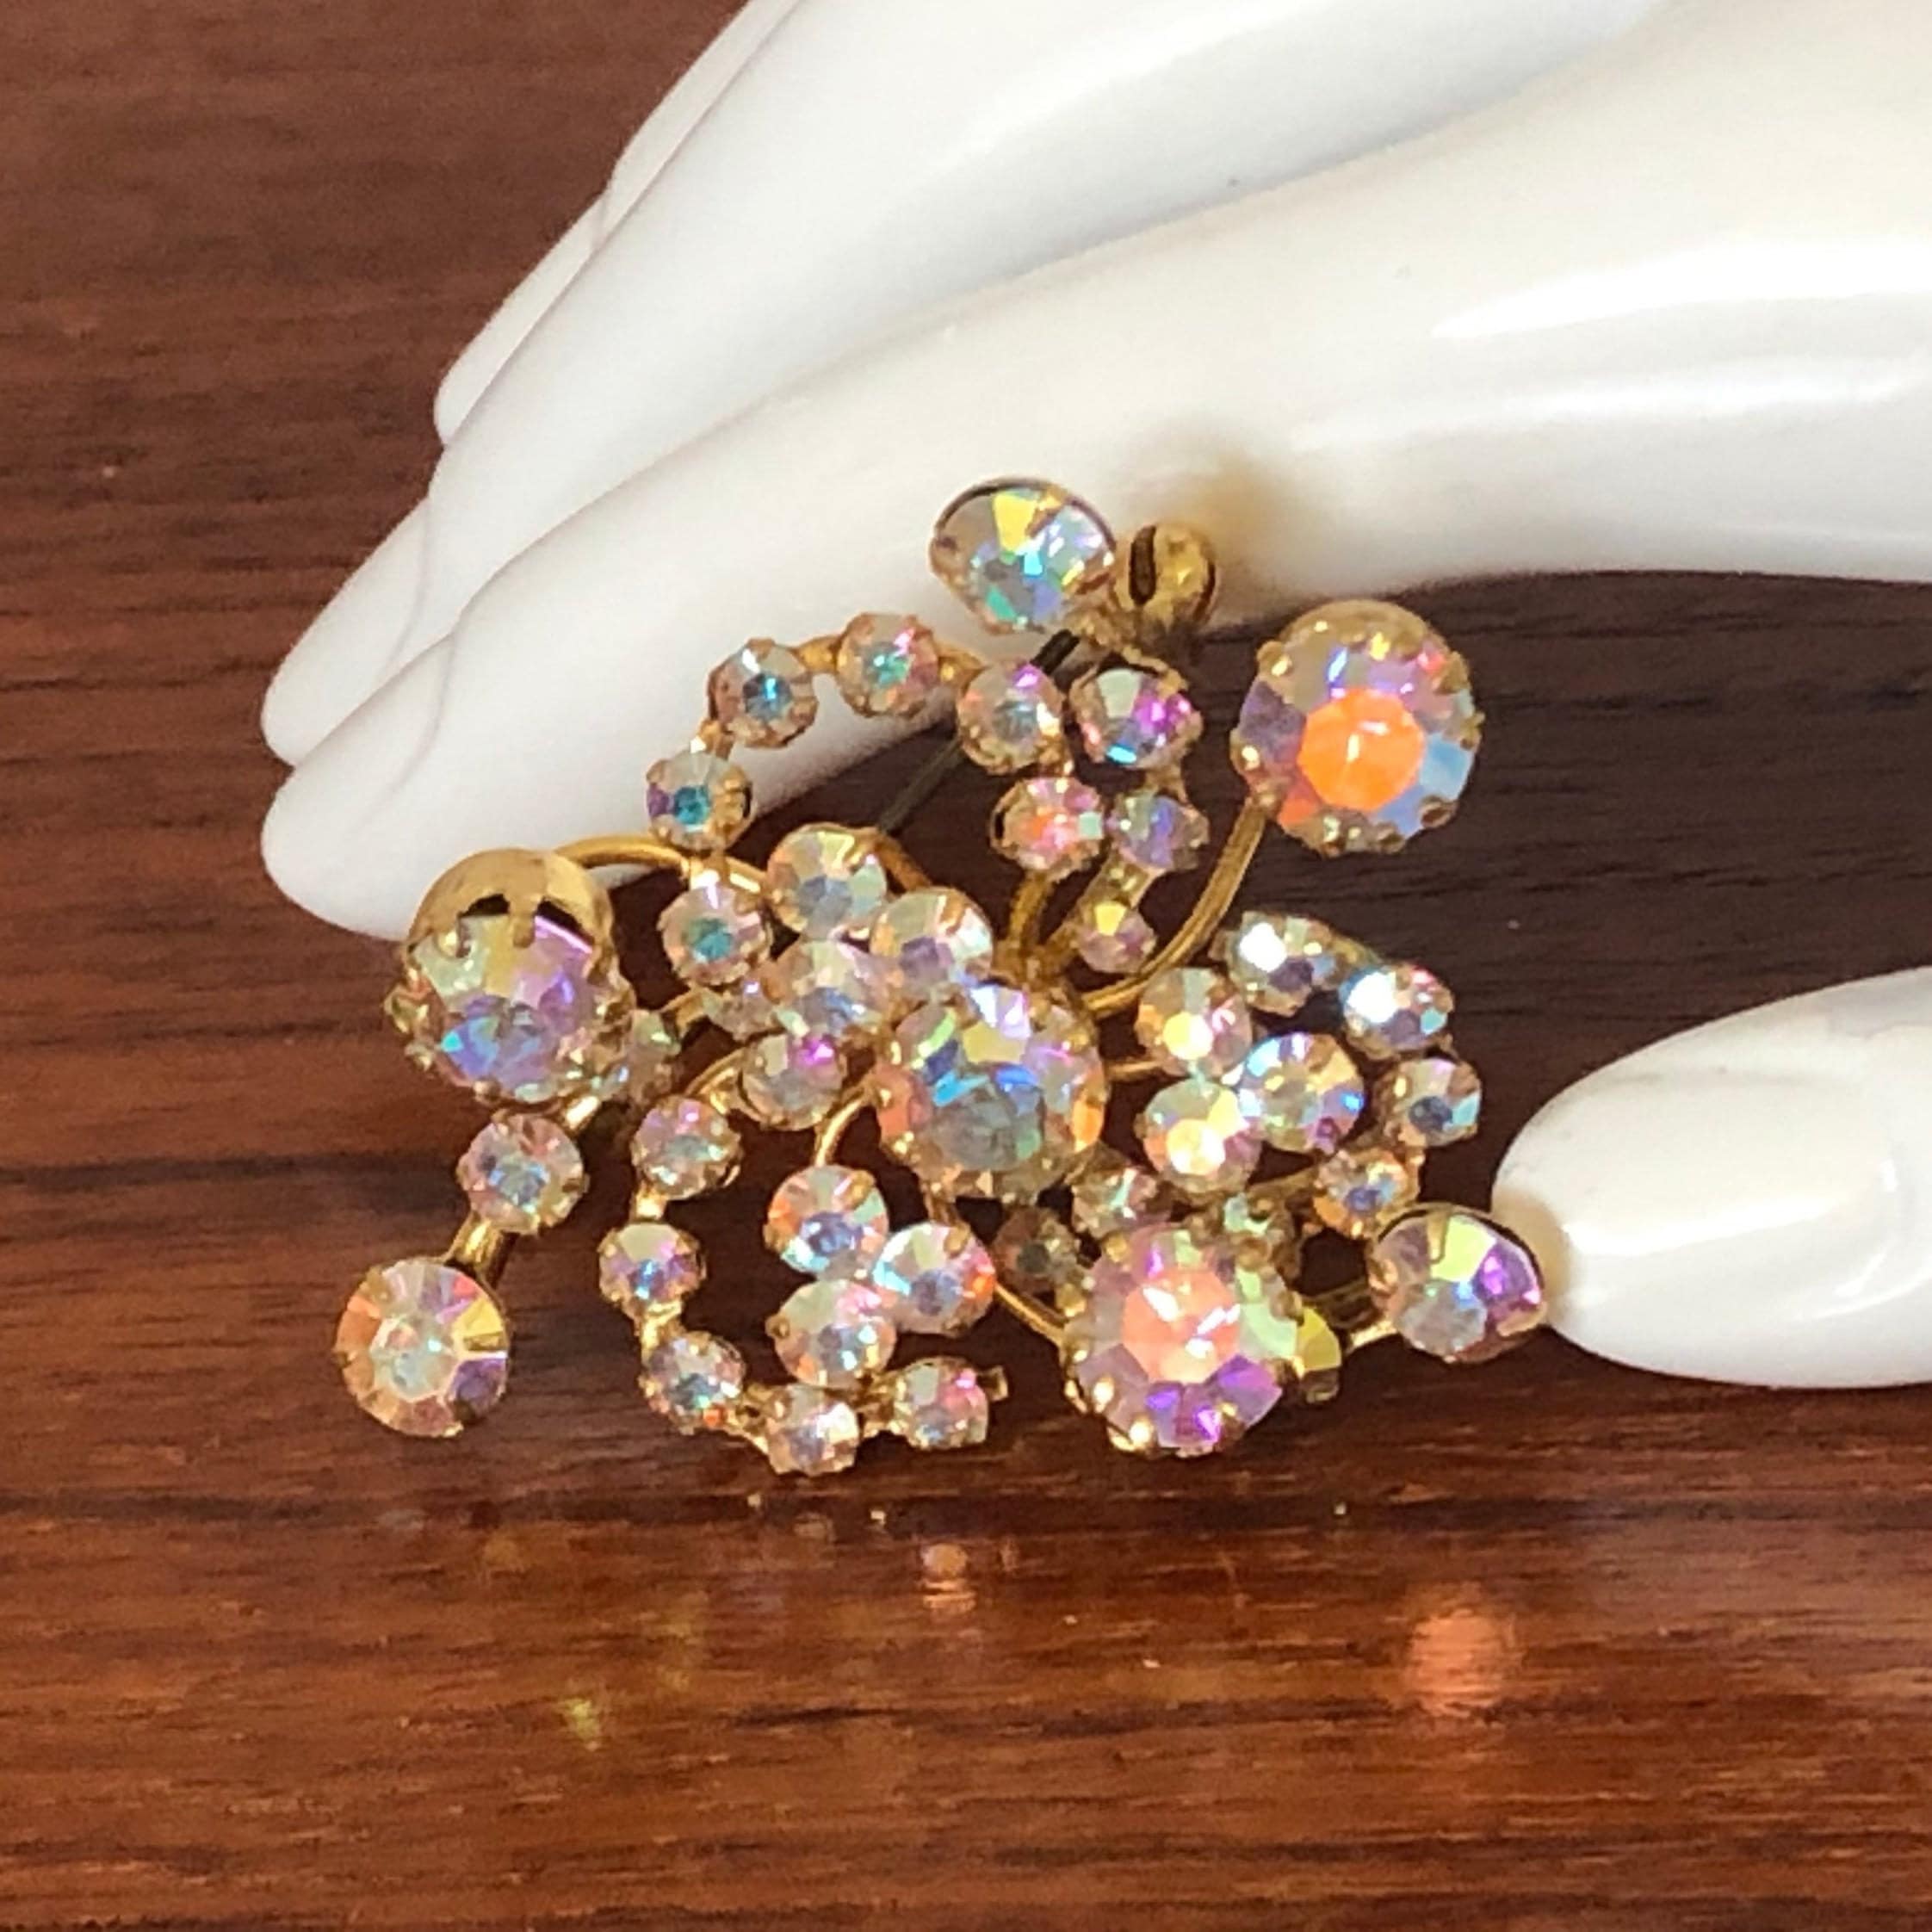 Costume Jewelry: What Are Collectors Looking For Today? – Kovels